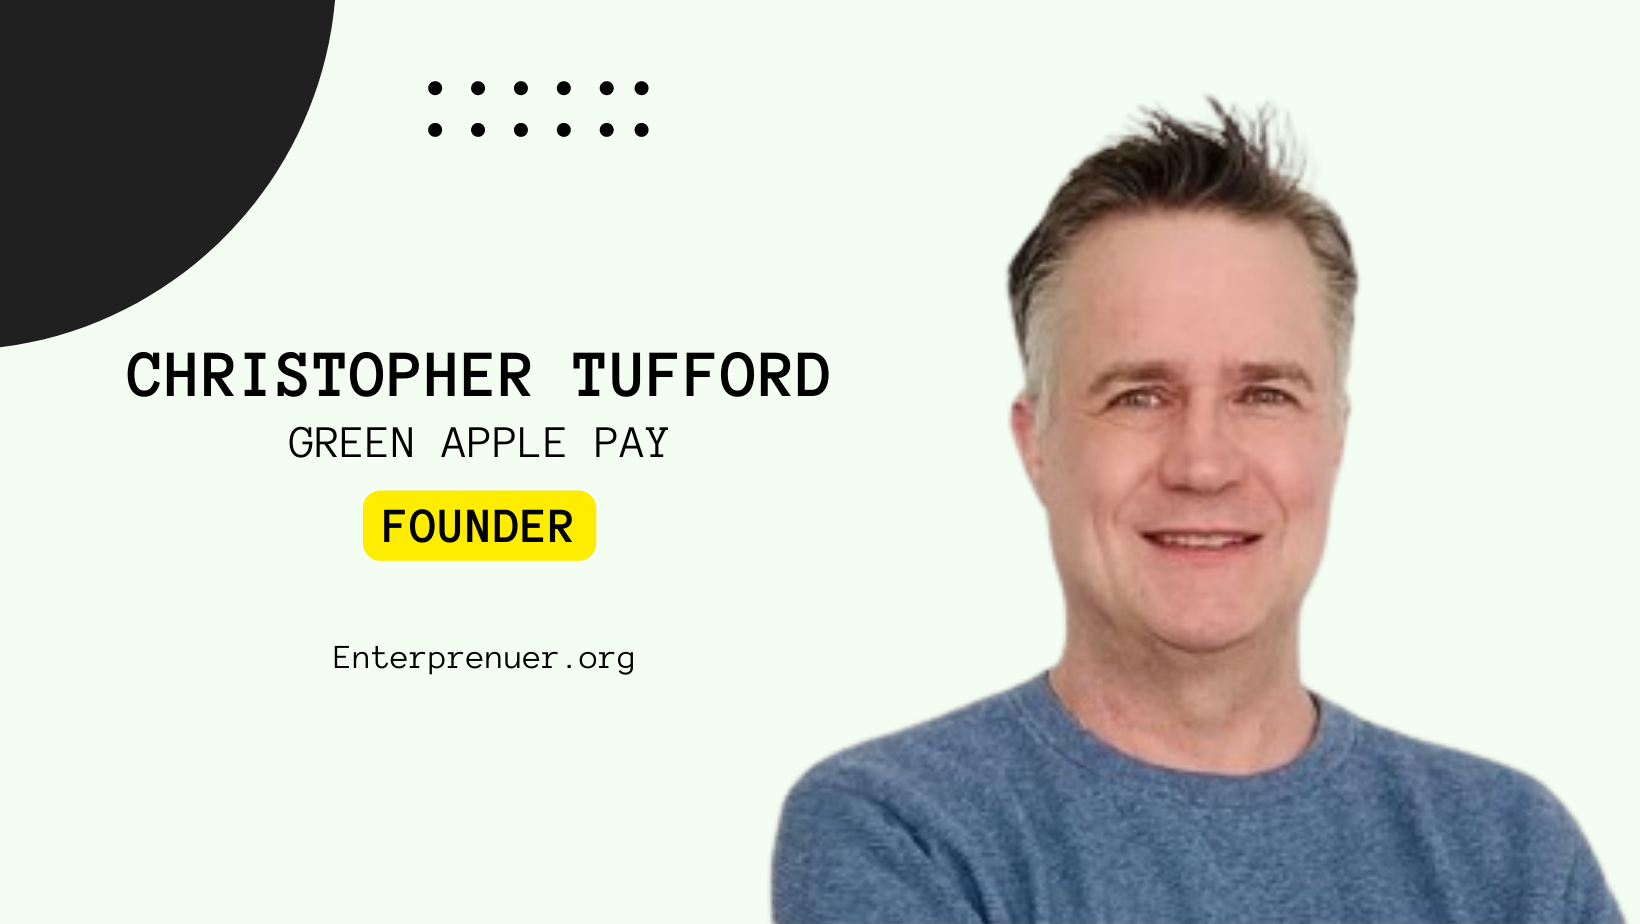 Meet Christopher Tufford Founder of Green Apple Pay